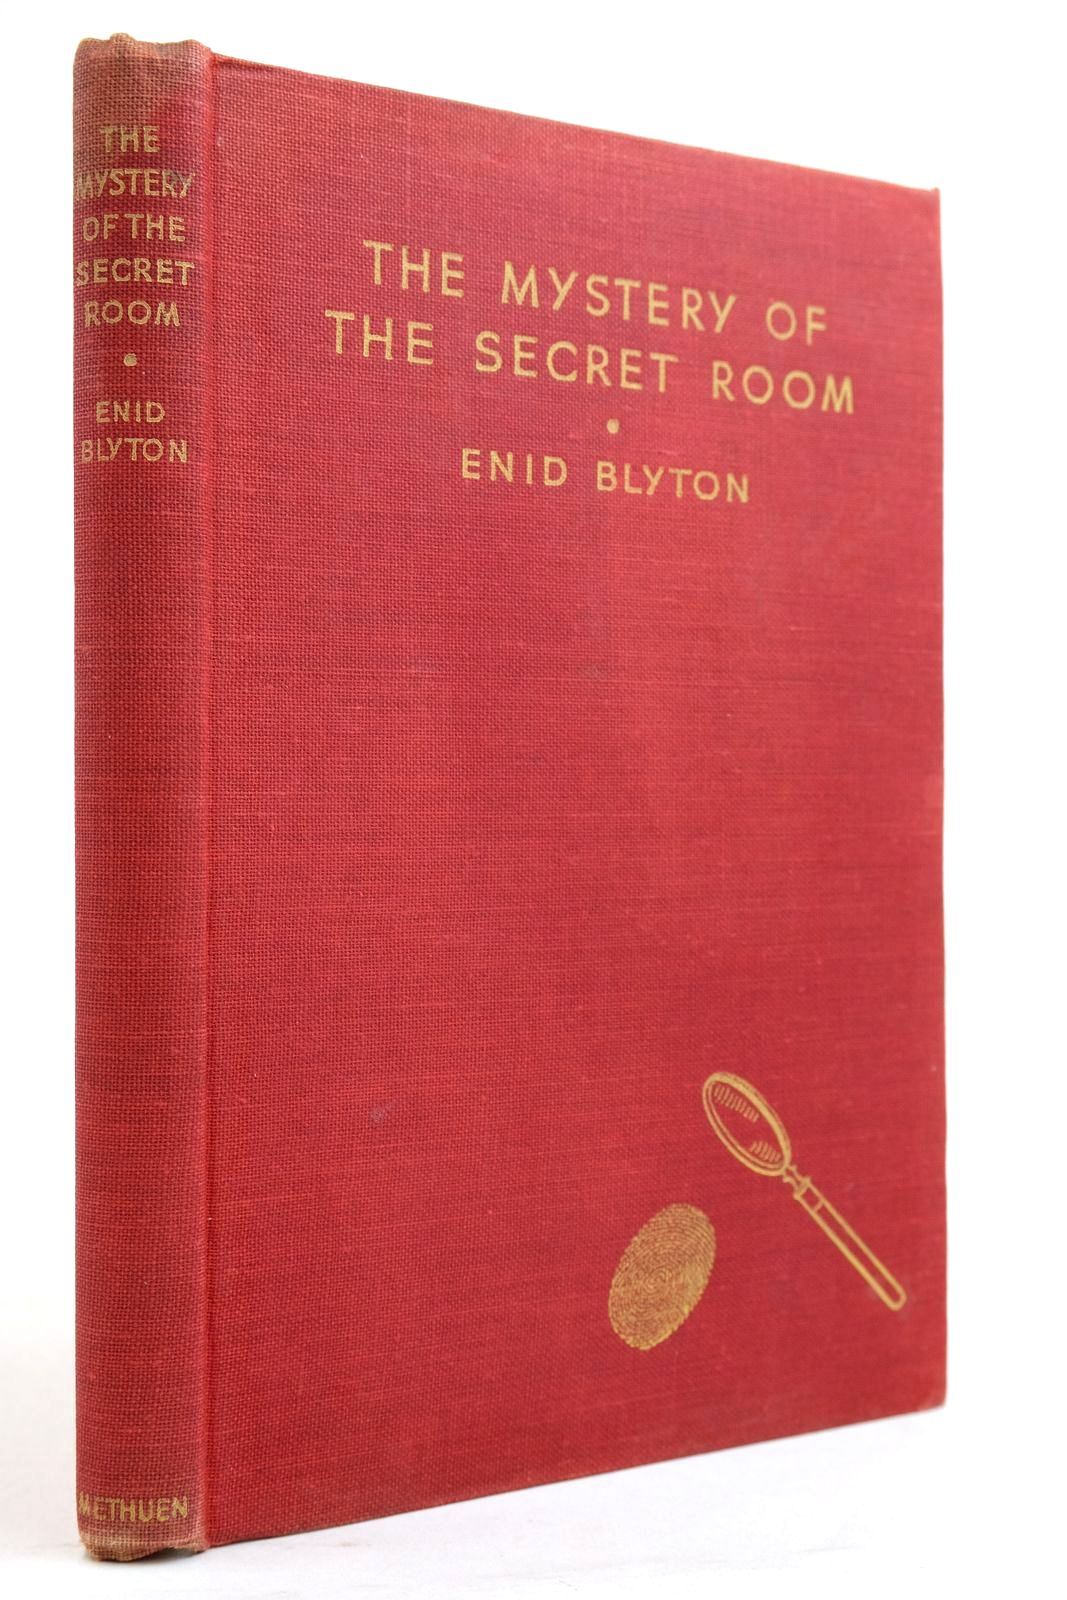 Photo of THE MYSTERY OF THE SECRET ROOM written by Blyton, Enid illustrated by Abbey, J. published by Methuen & Co. Ltd. (STOCK CODE: 2134316)  for sale by Stella & Rose's Books